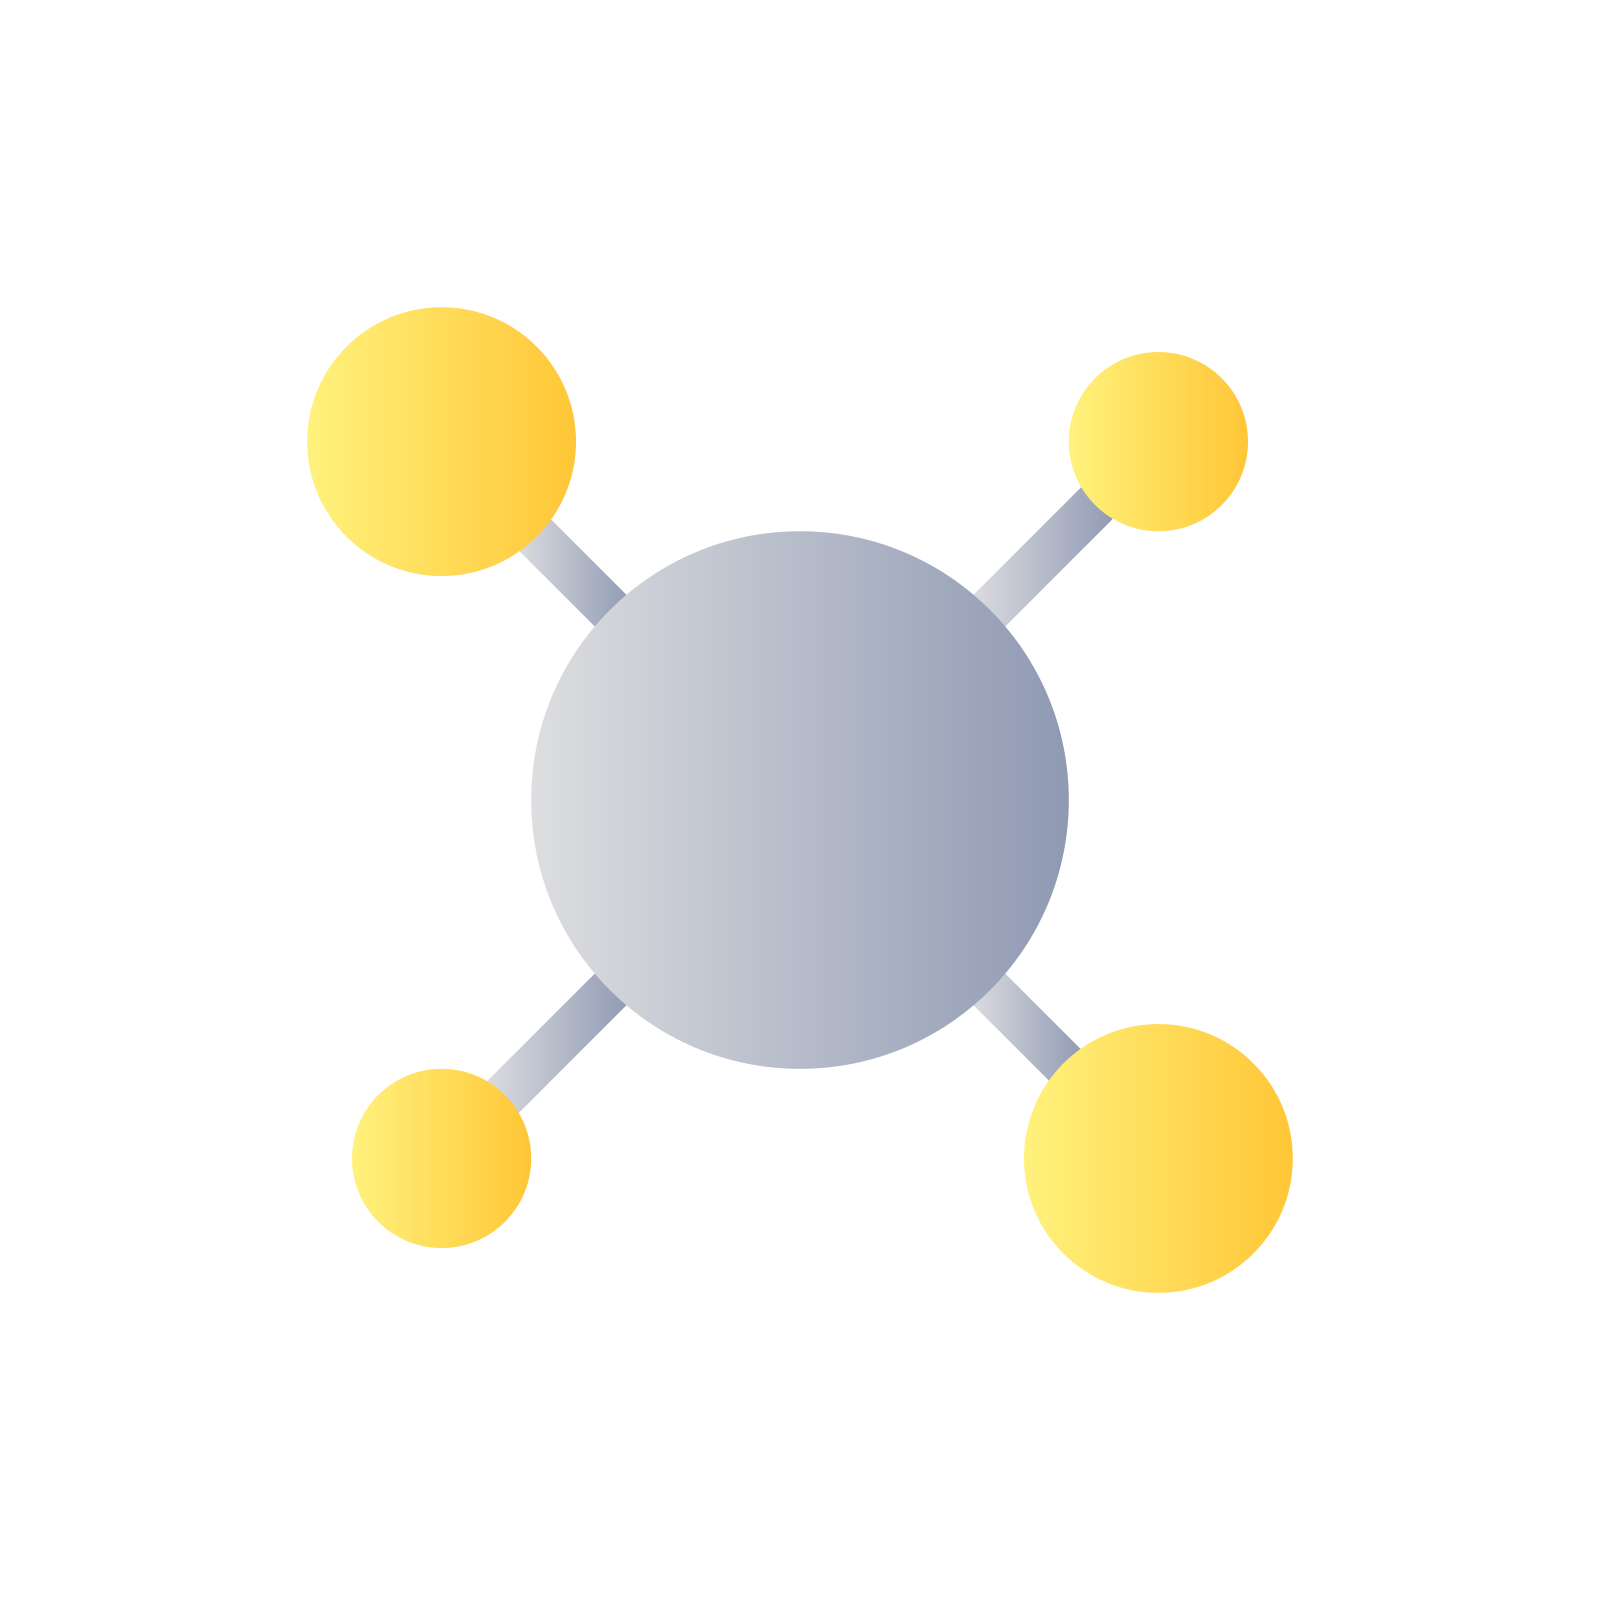 Structure Of Molecules icon